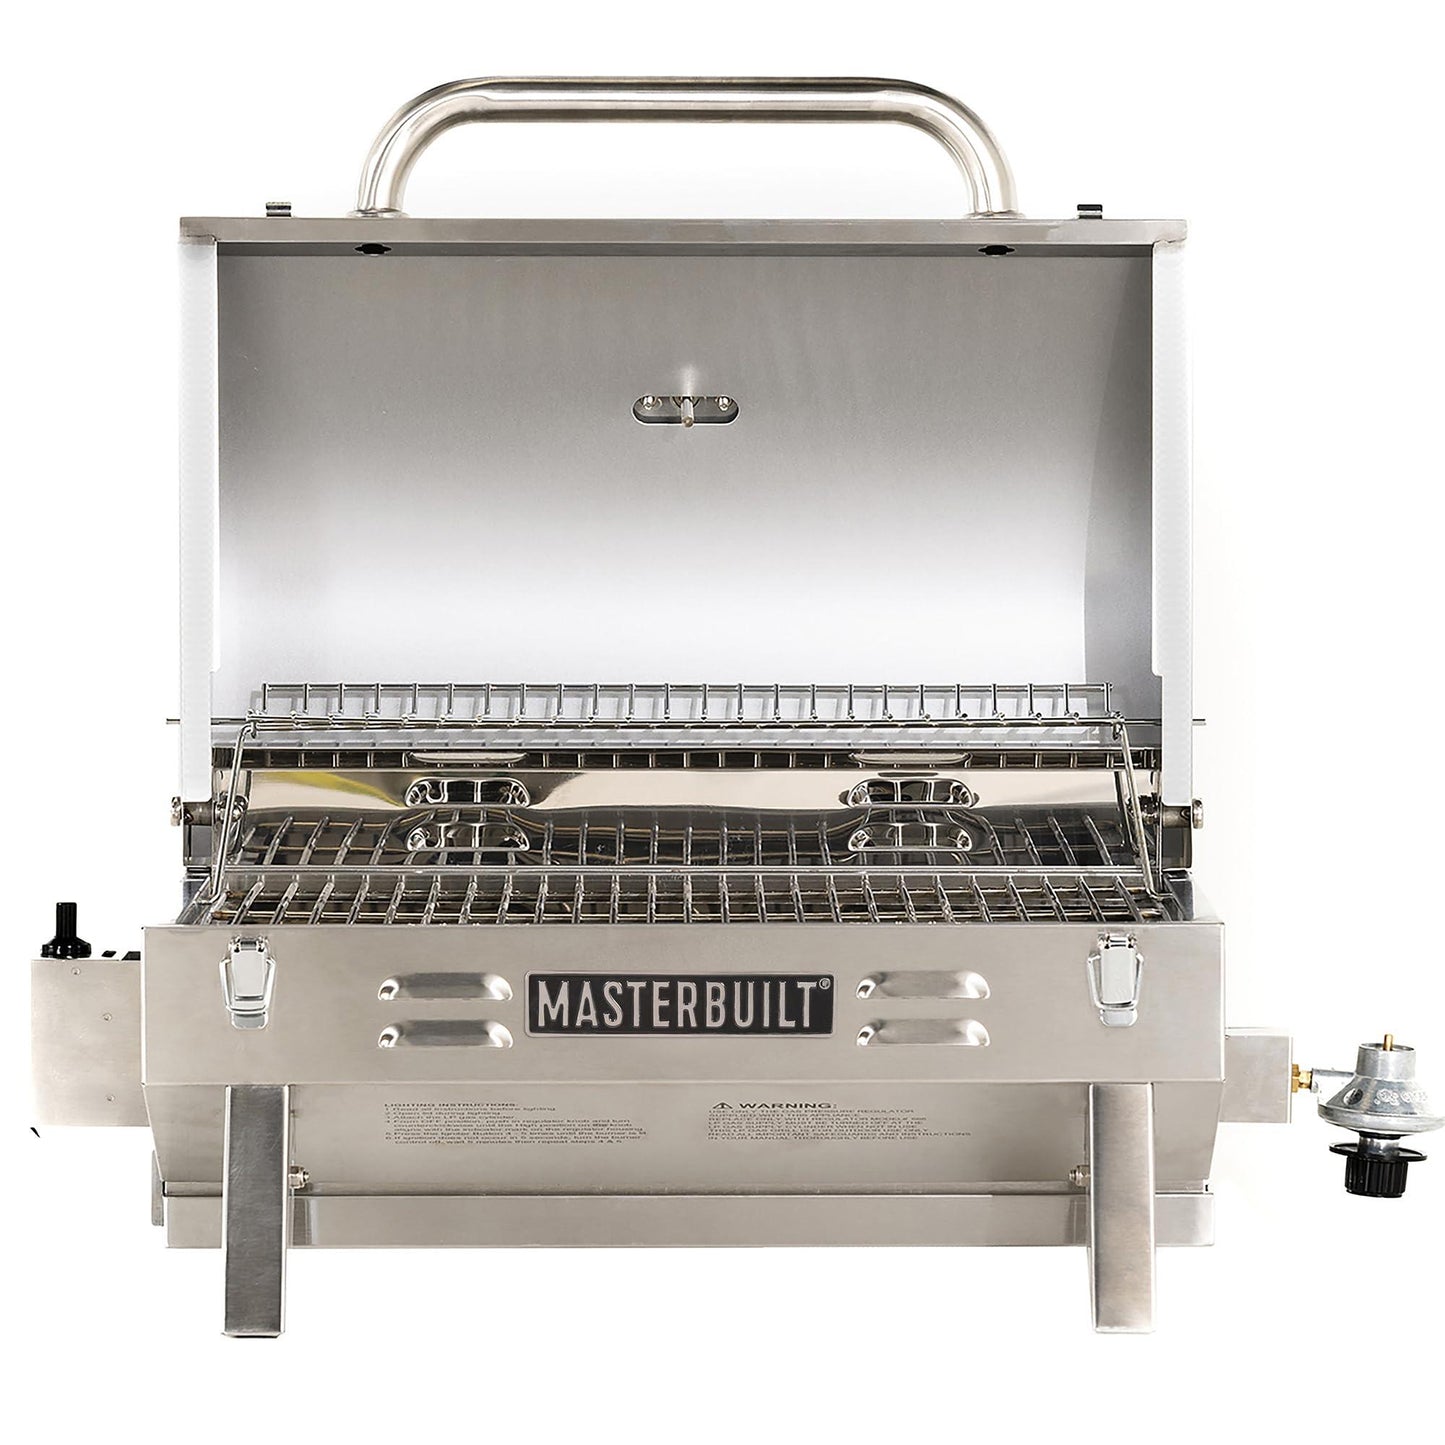 Masterbuilt MB20030819 Portable Propane Grill, Stainless Steel - CookCave